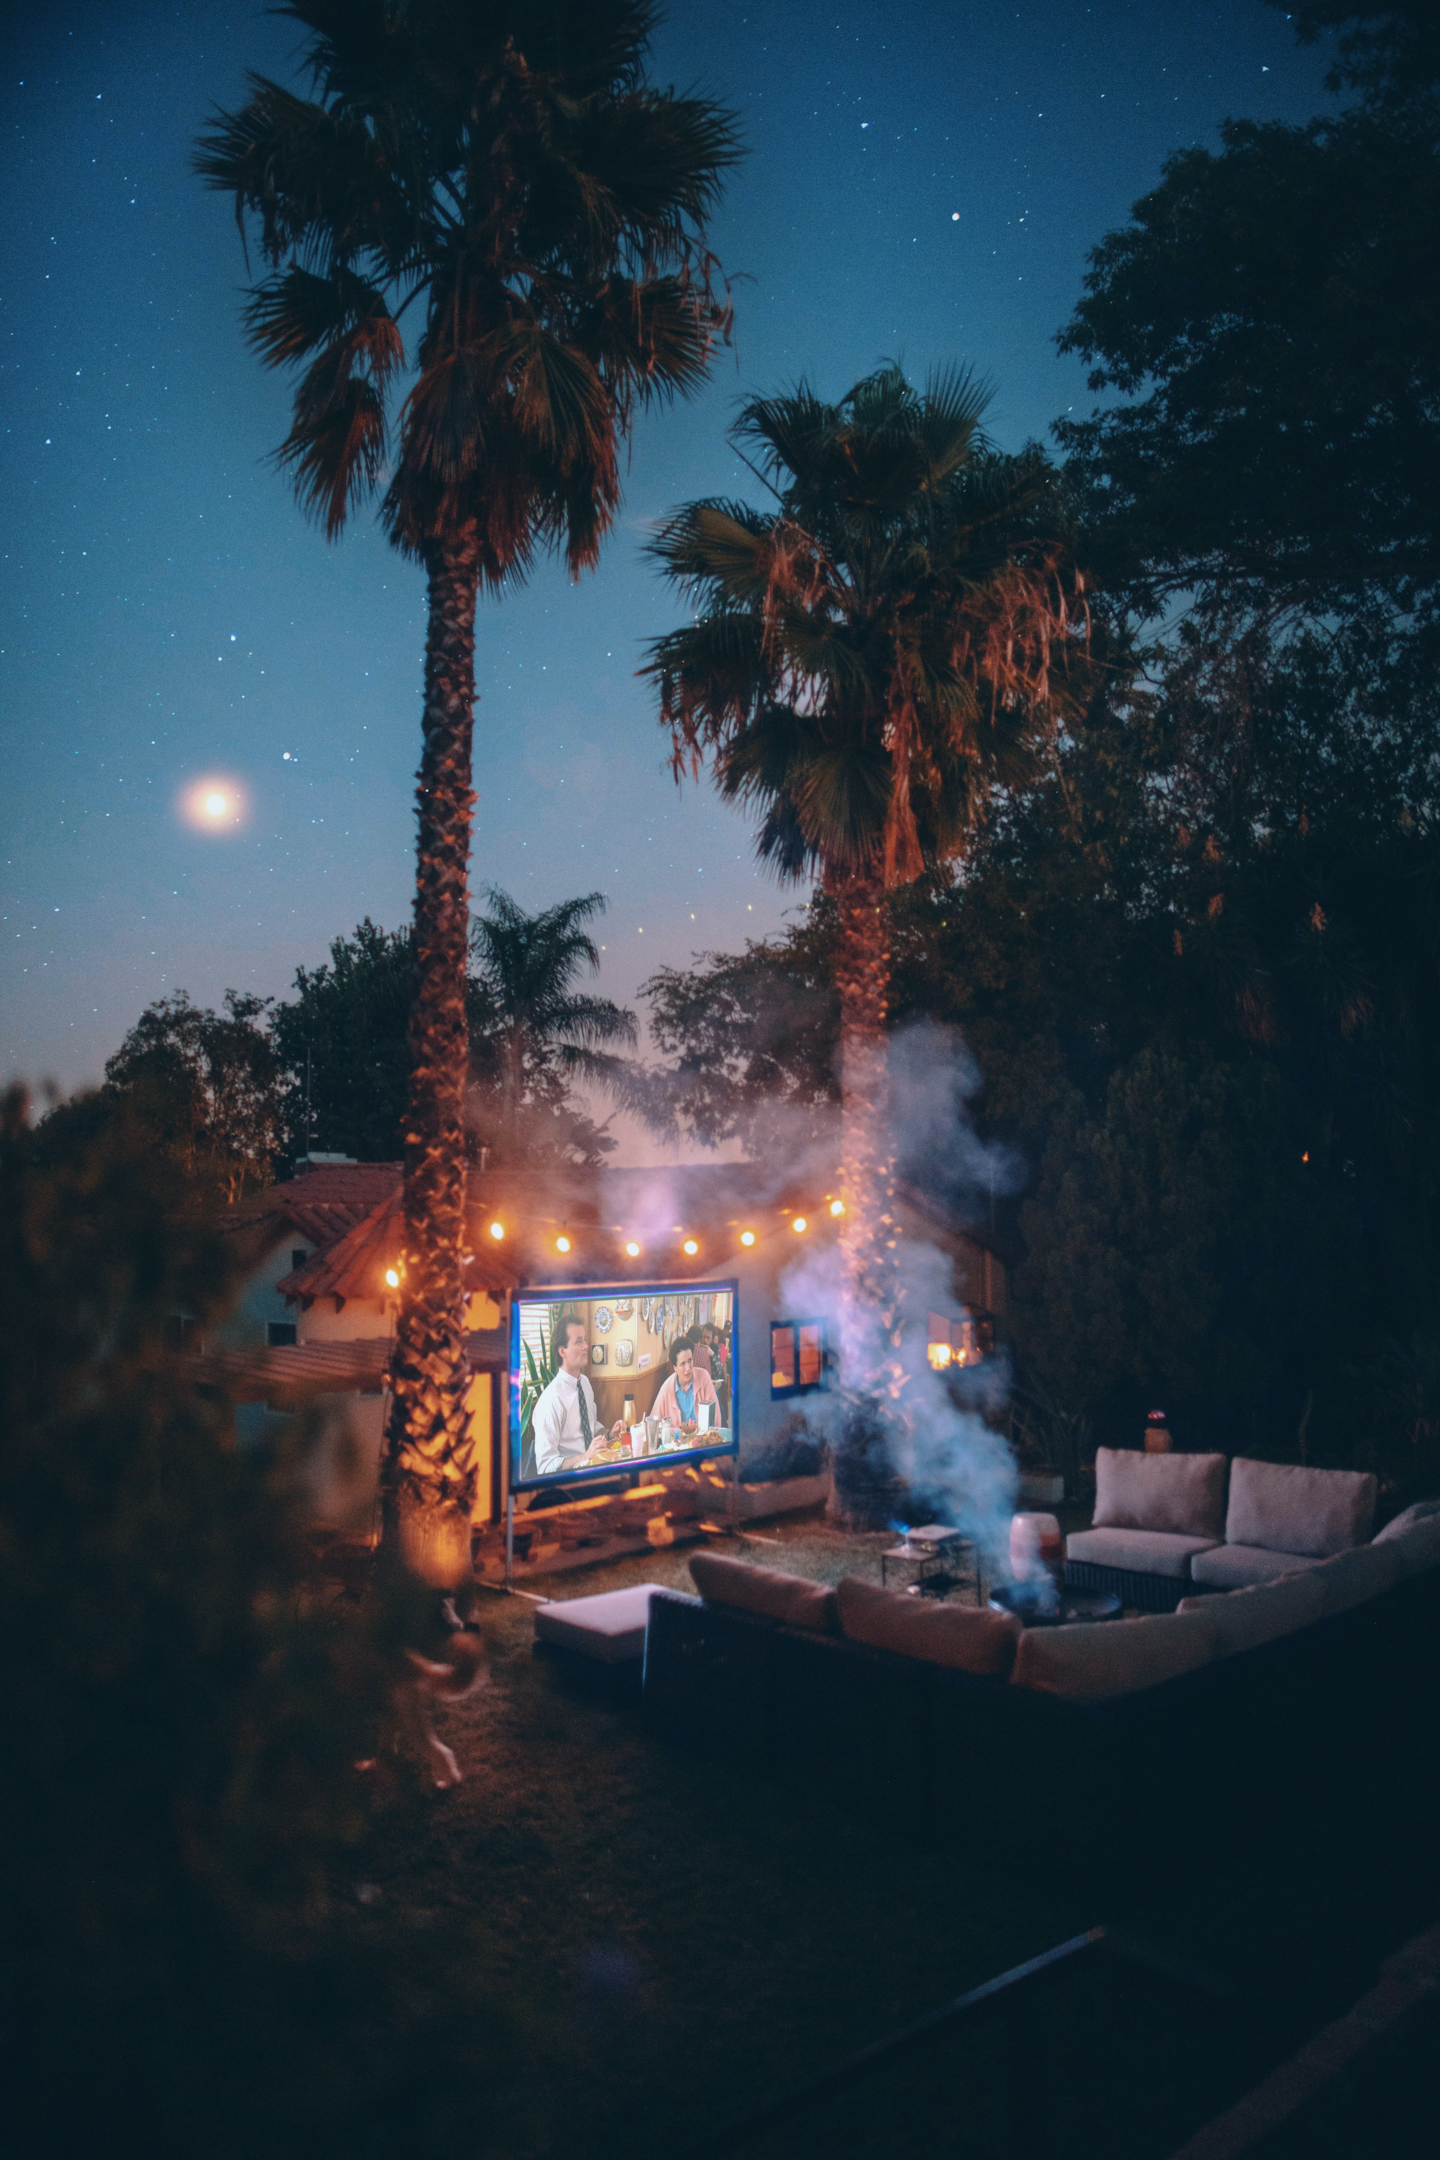 Projector Cinema | Photo by Roberto Nickson from Pexels | https://www.pexels.com/photo/palm-trees-near-projection-screen-during-nighttime-3131971/